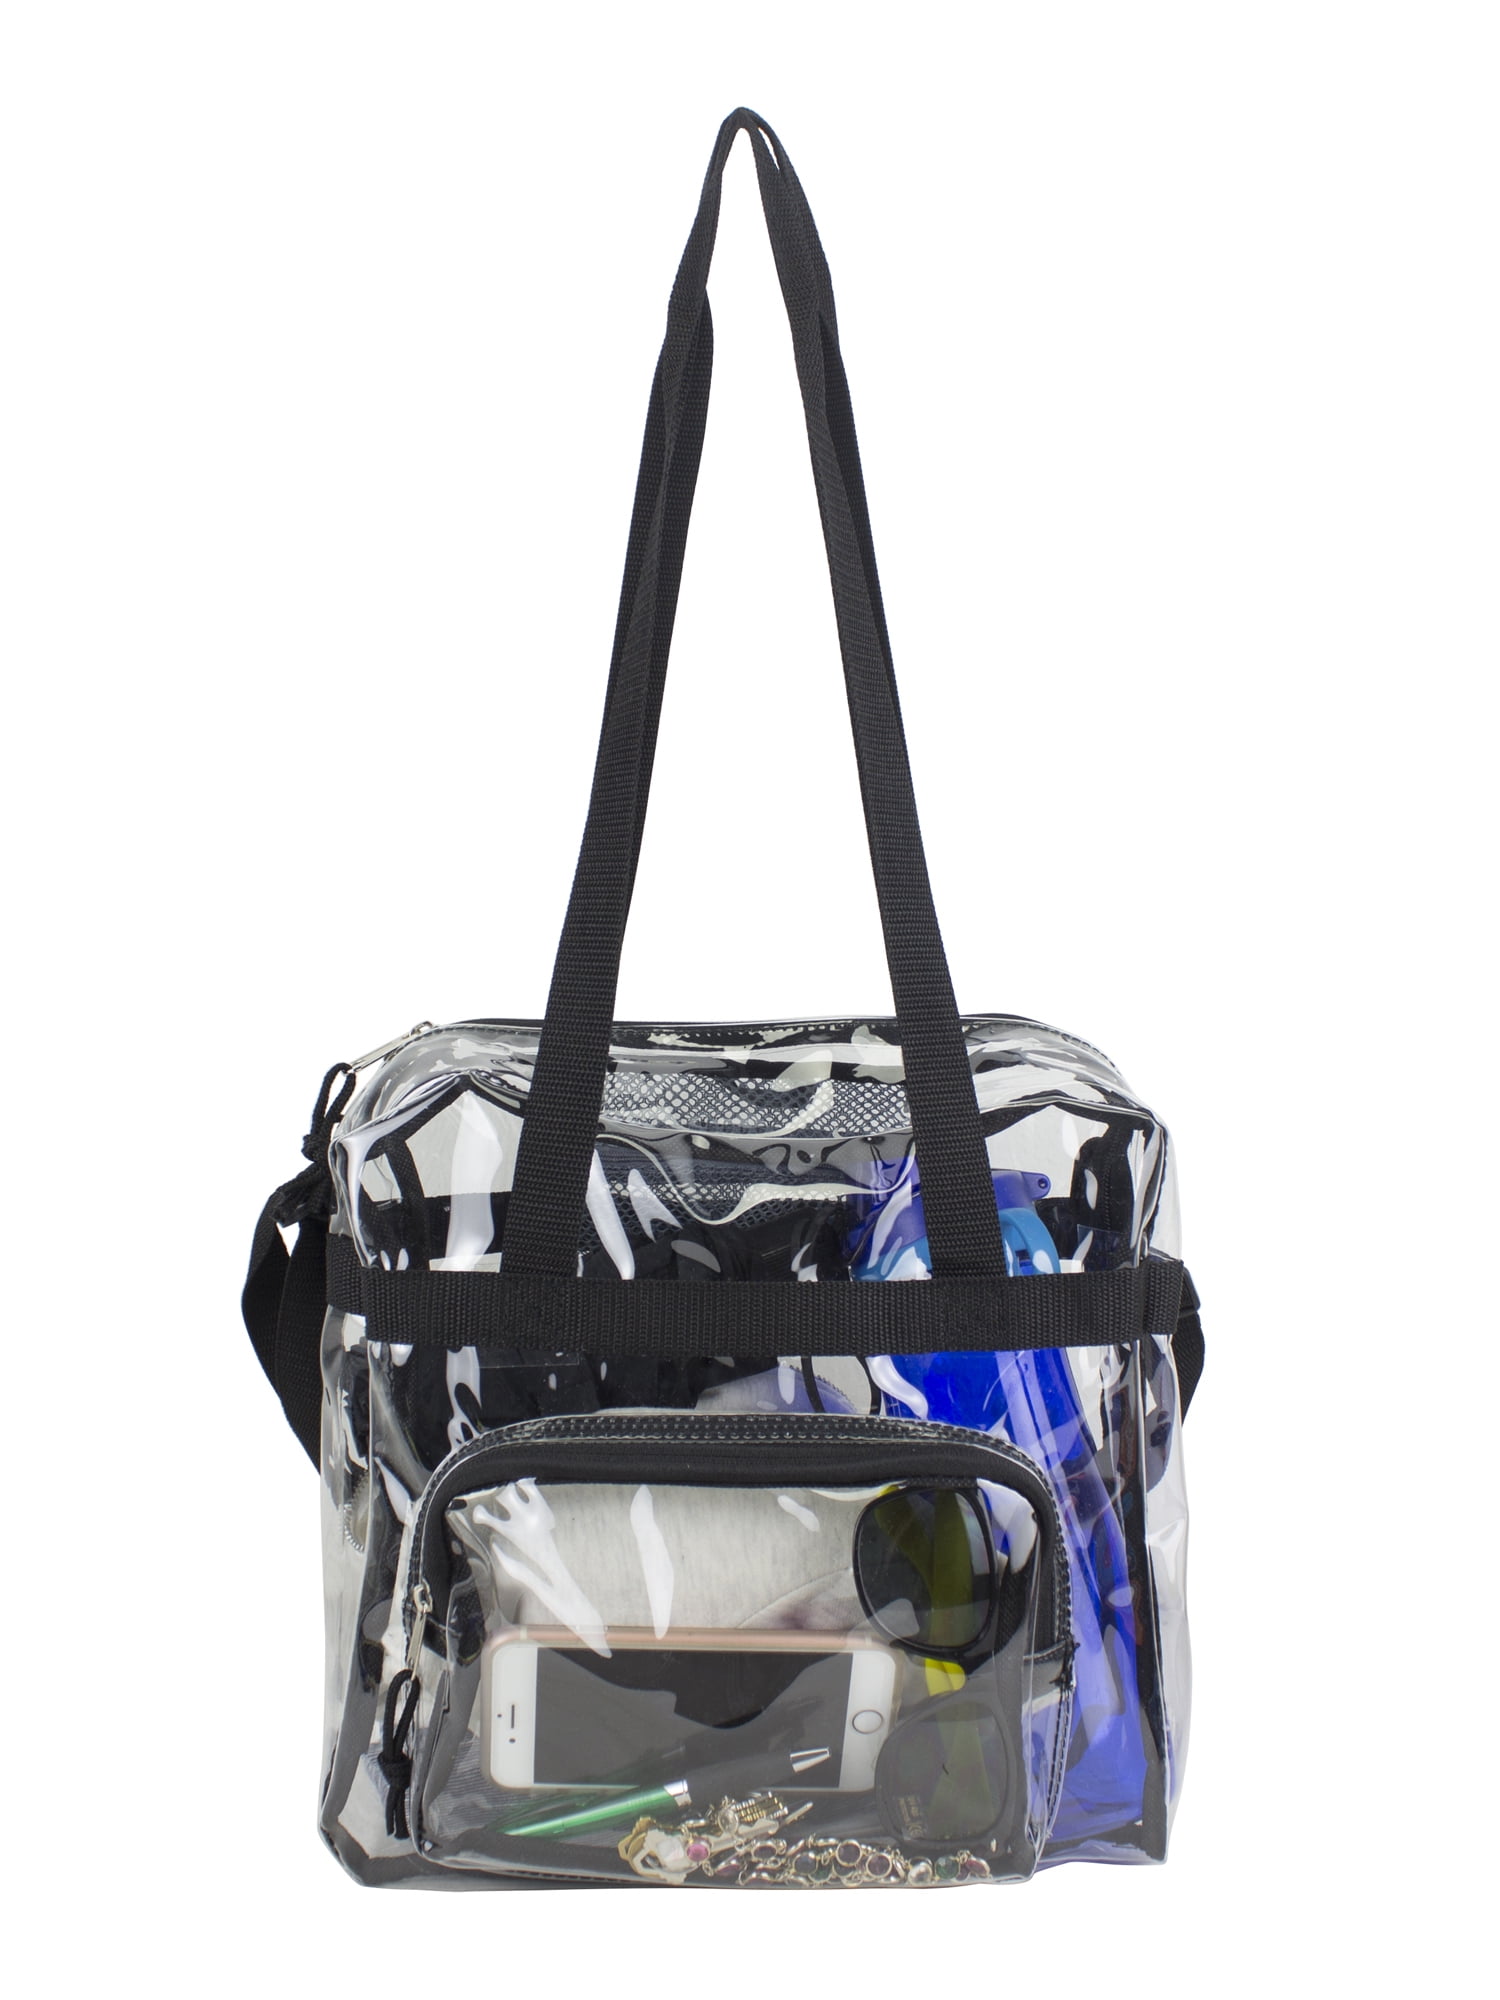 Oraben Clear Tote Bag, Clear Bag Stadium Approved, Transparent See Through Clear Tote Bag for Work, Sports Games,Gym